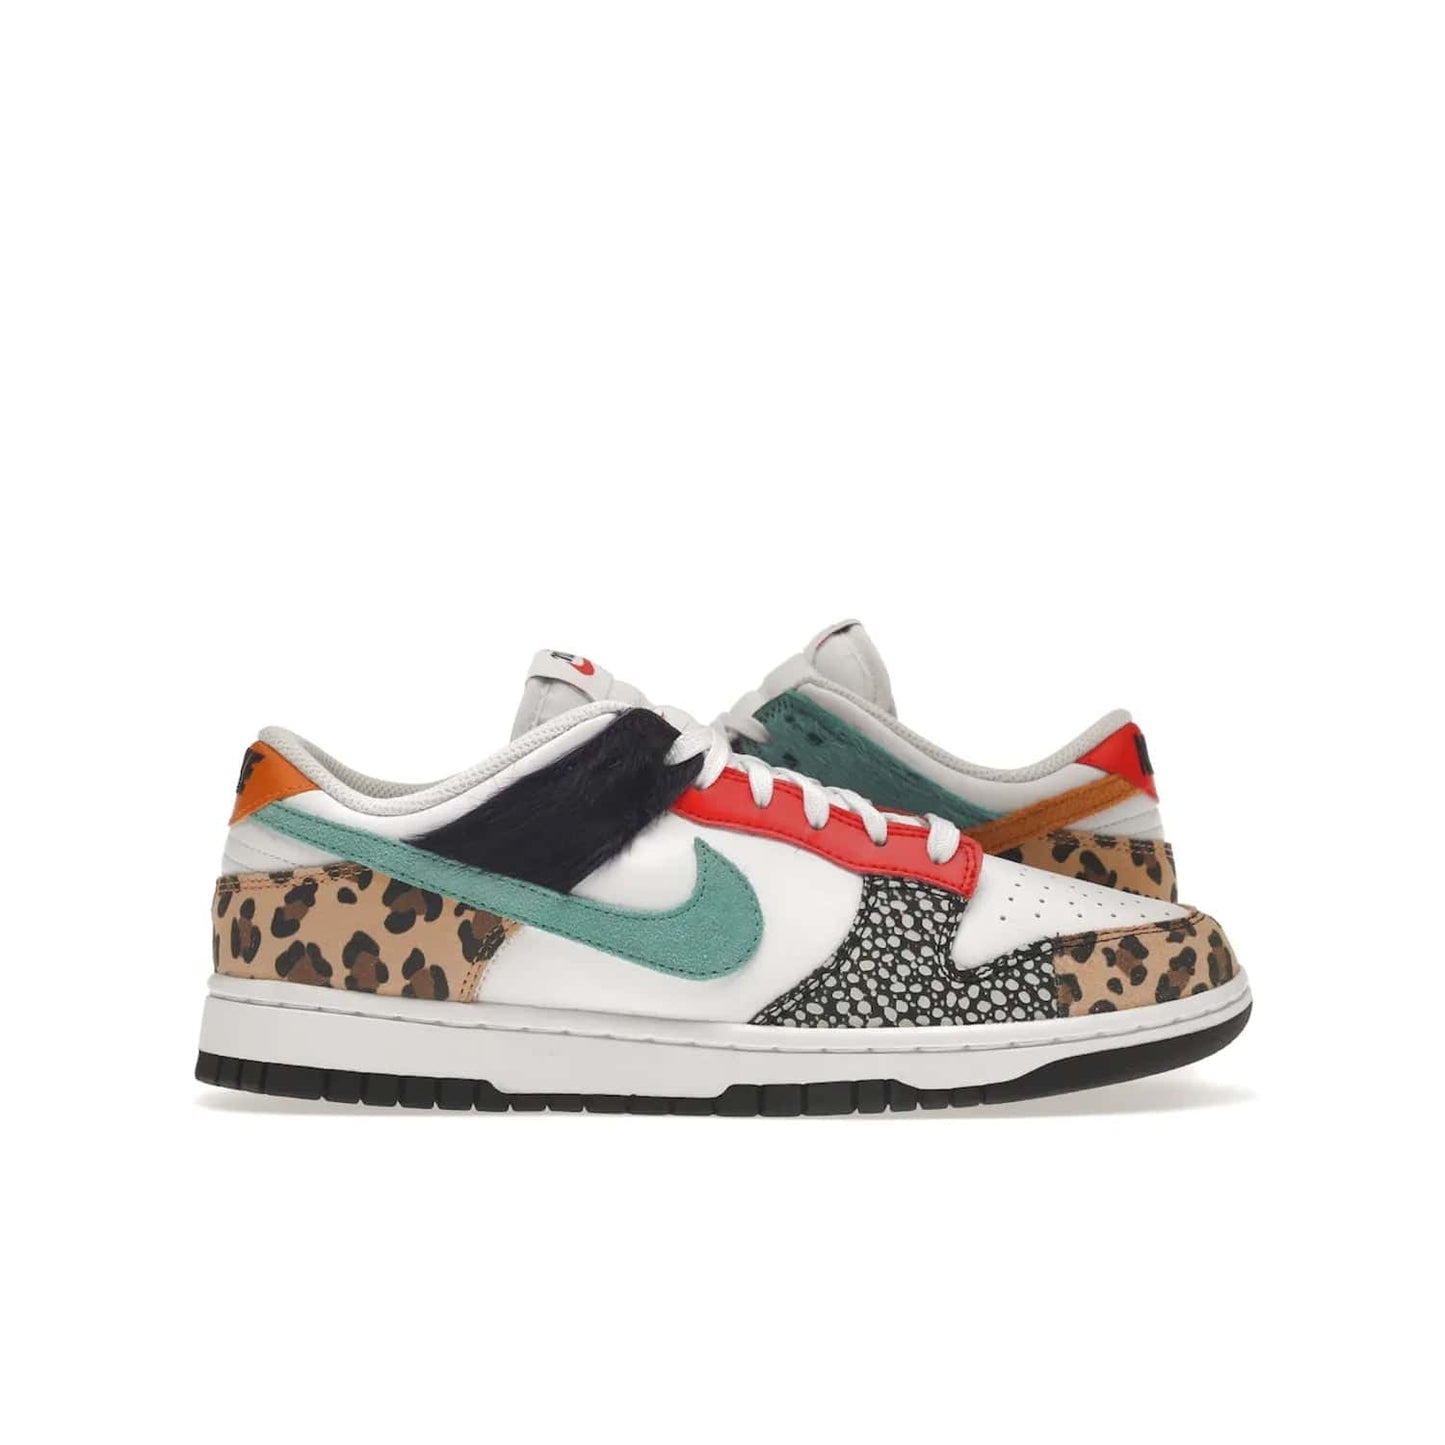 Nike Dunk Low Safari Mix (Women's) - Image 1 - Only at www.BallersClubKickz.com - Express your unique style with the Women’s Nike Dunk Low Safari Mix. Featuring a vibrant mix of white leather, leopard Durabuck, faux-horsehair, suede, and more, this stylish sneaker will turn heads. Shop now for a bold look at an affordable $120 price tag. Available in May 2022.